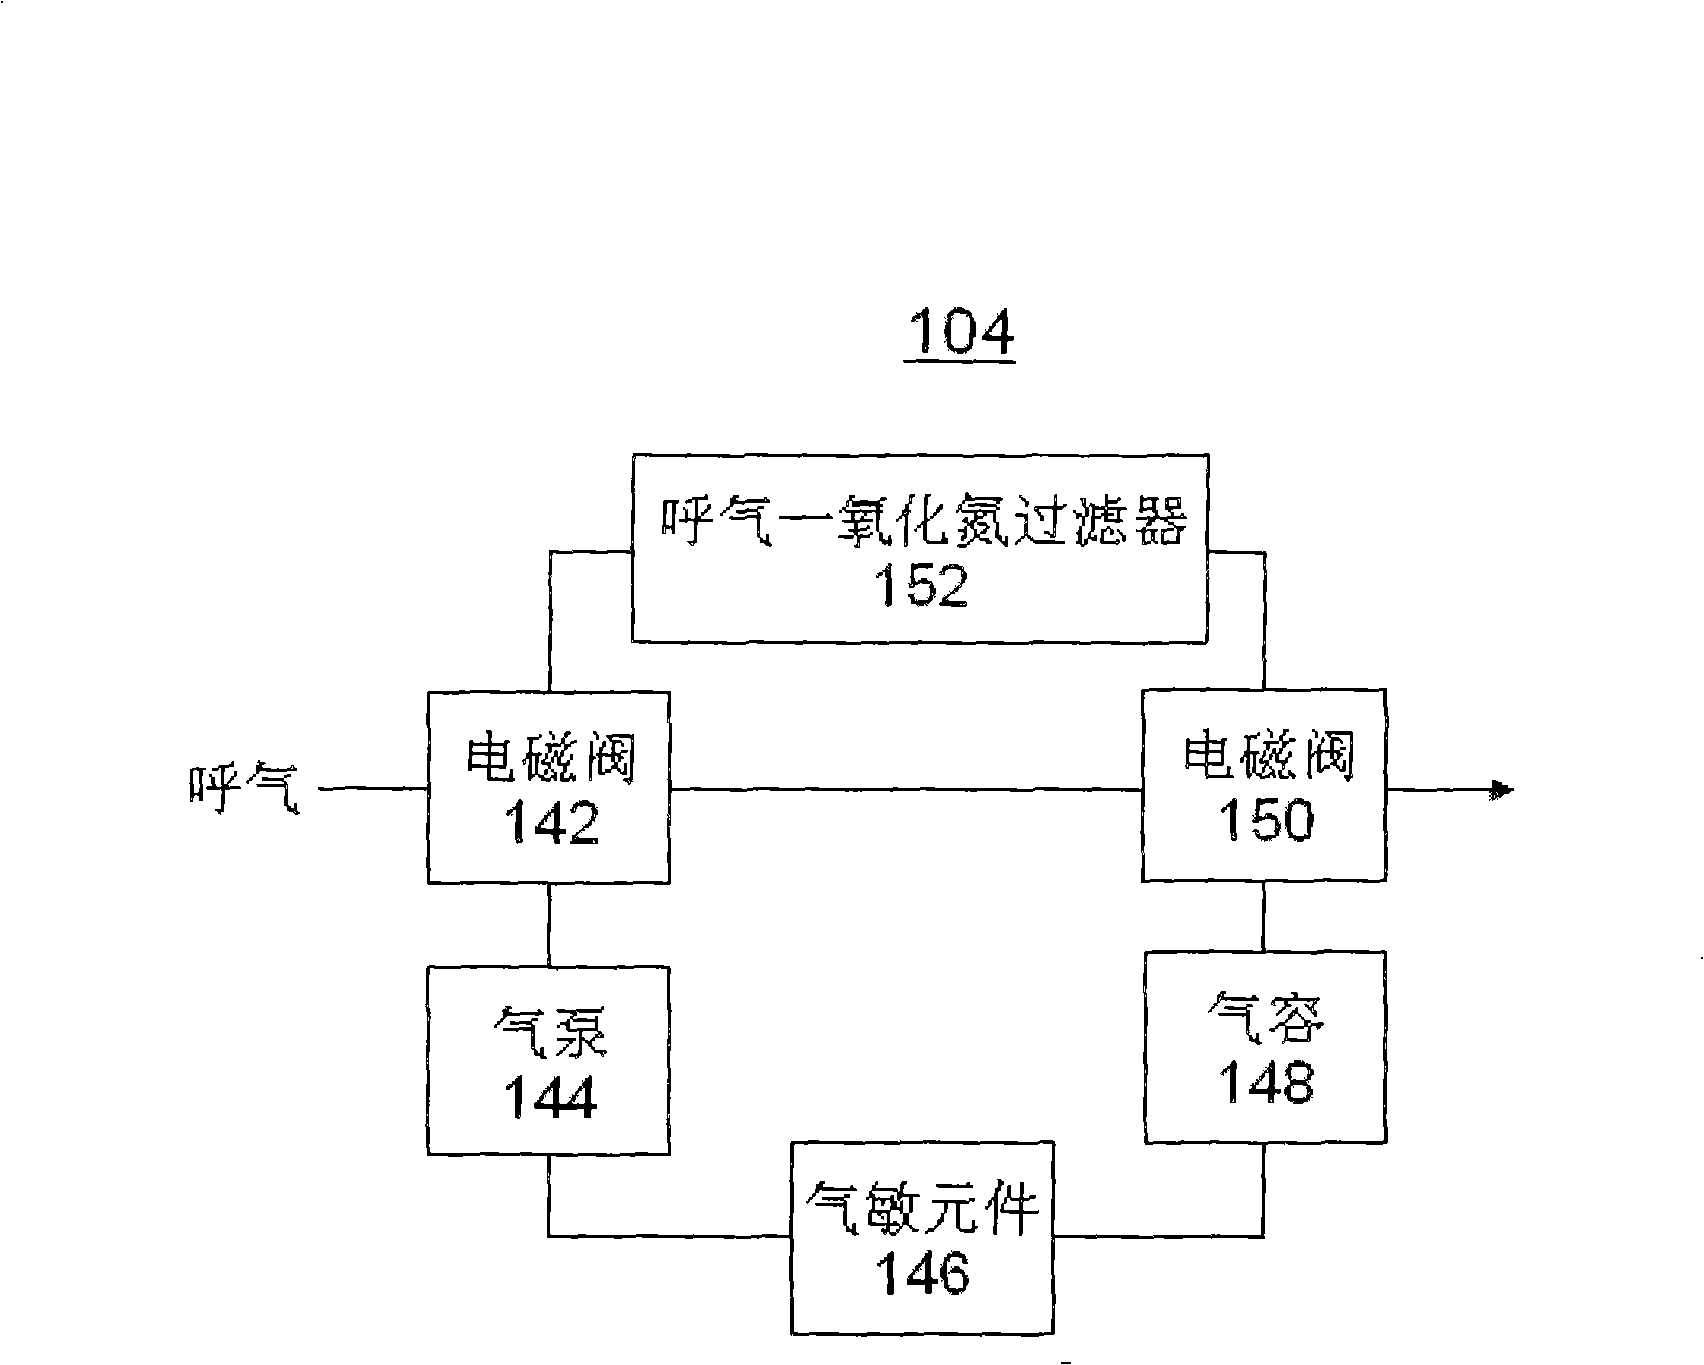 Expiration nitric oxide detection device